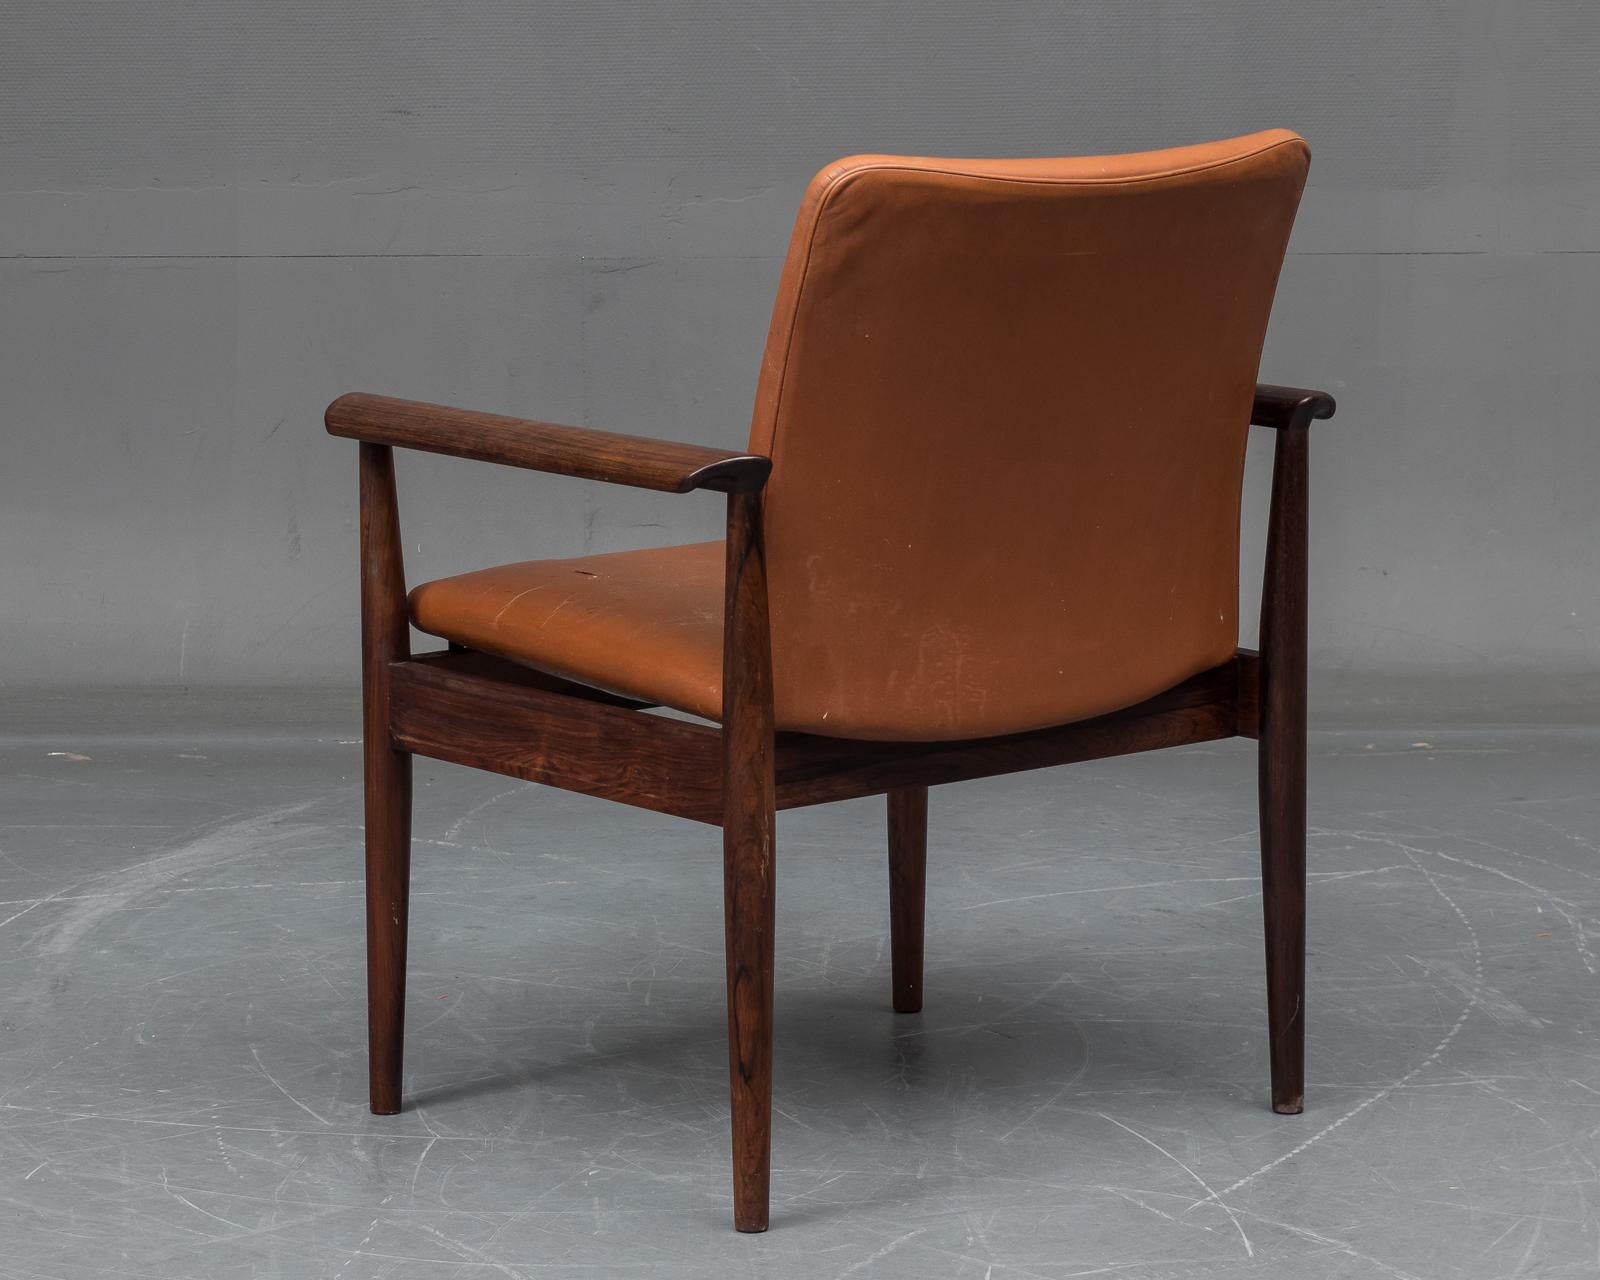 Finn Juhl Armchair 209 Diplomat, Early 1960s In Fair Condition For Sale In Vienna, AT